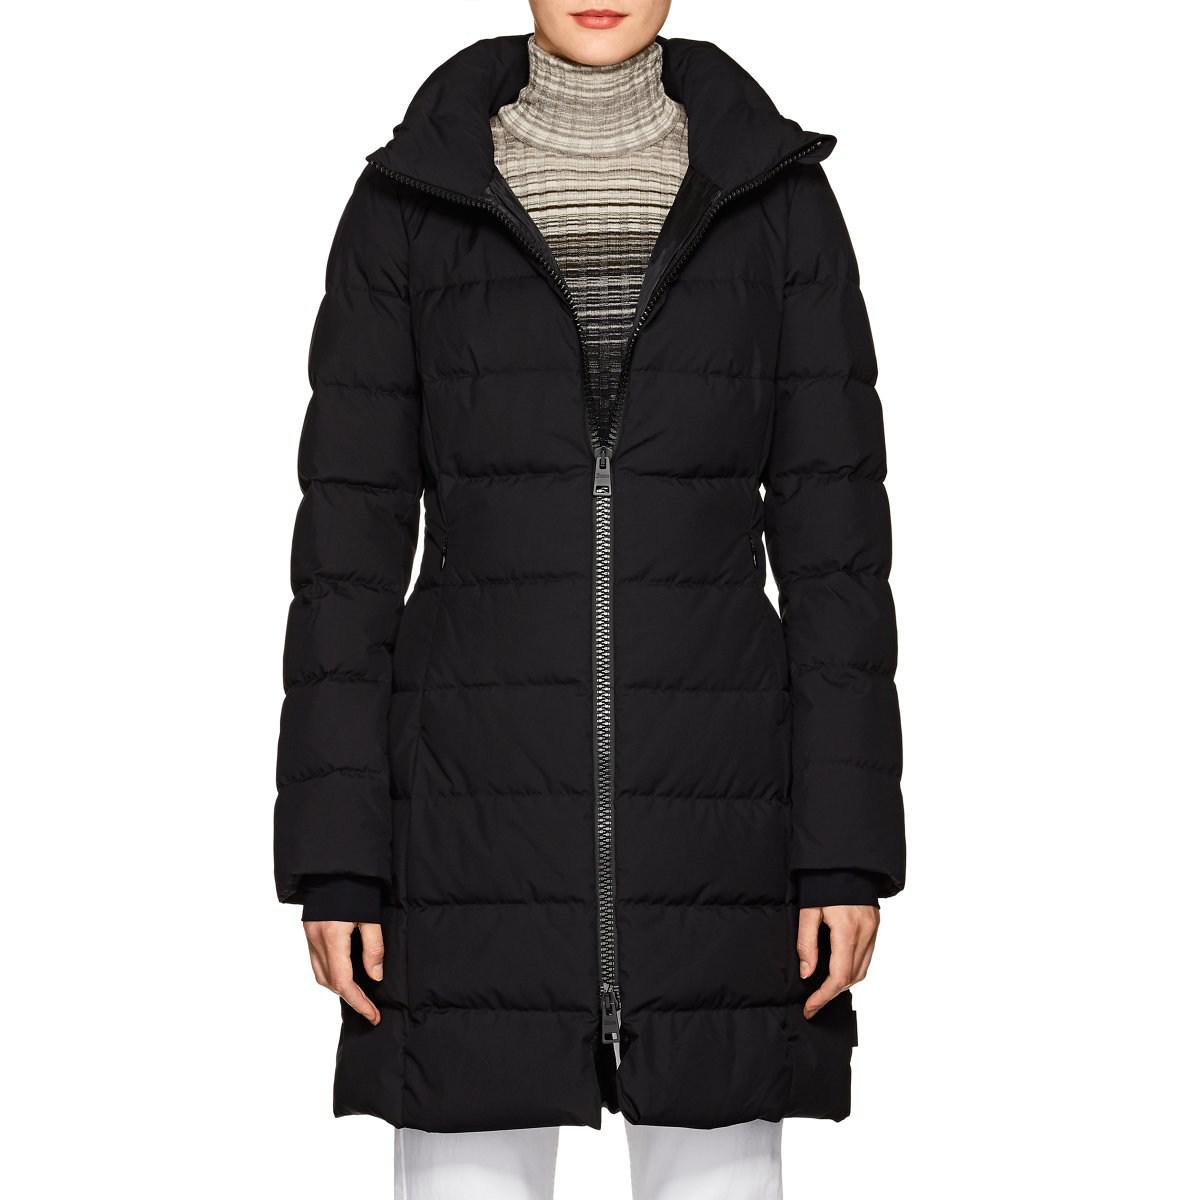 Lyst - Herno Down Long Puffer Coat in Black